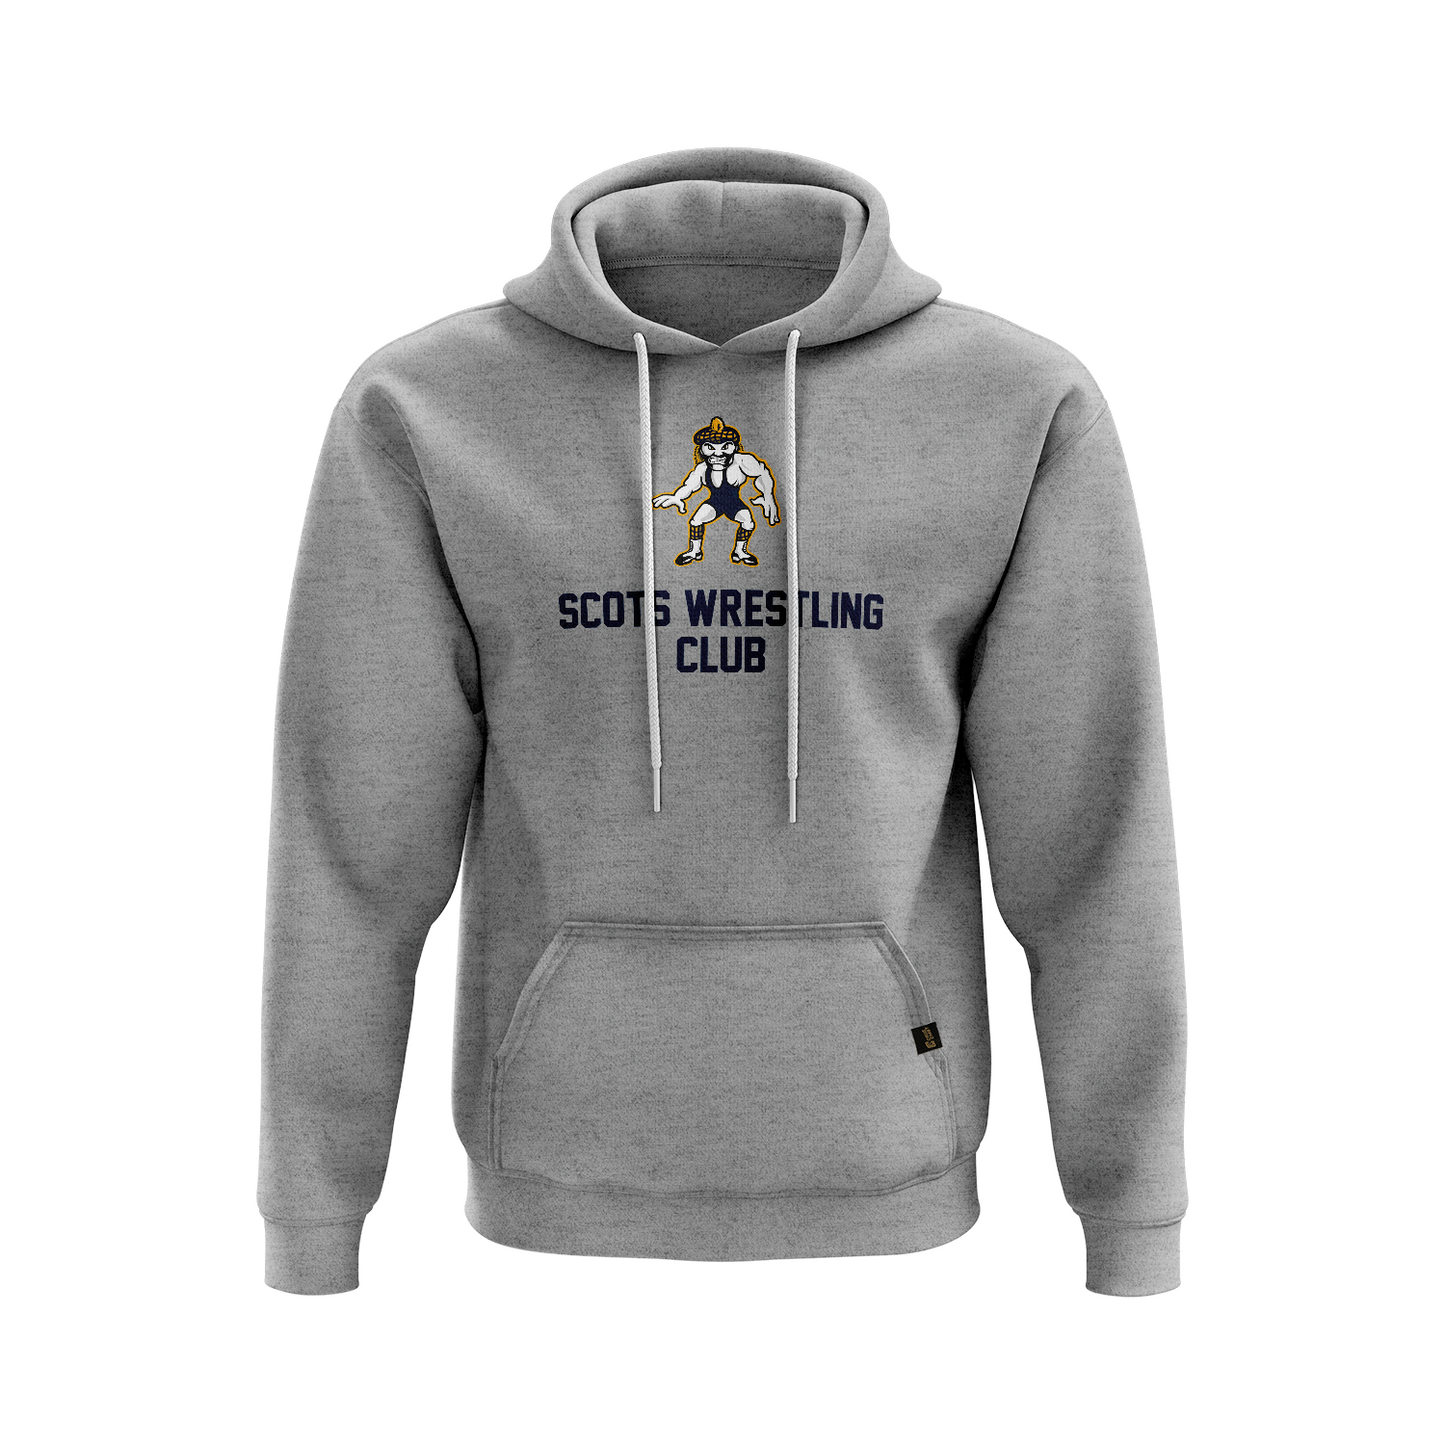 Scots Wrestling Club pullover hoodie Standard Issue, athl. grey